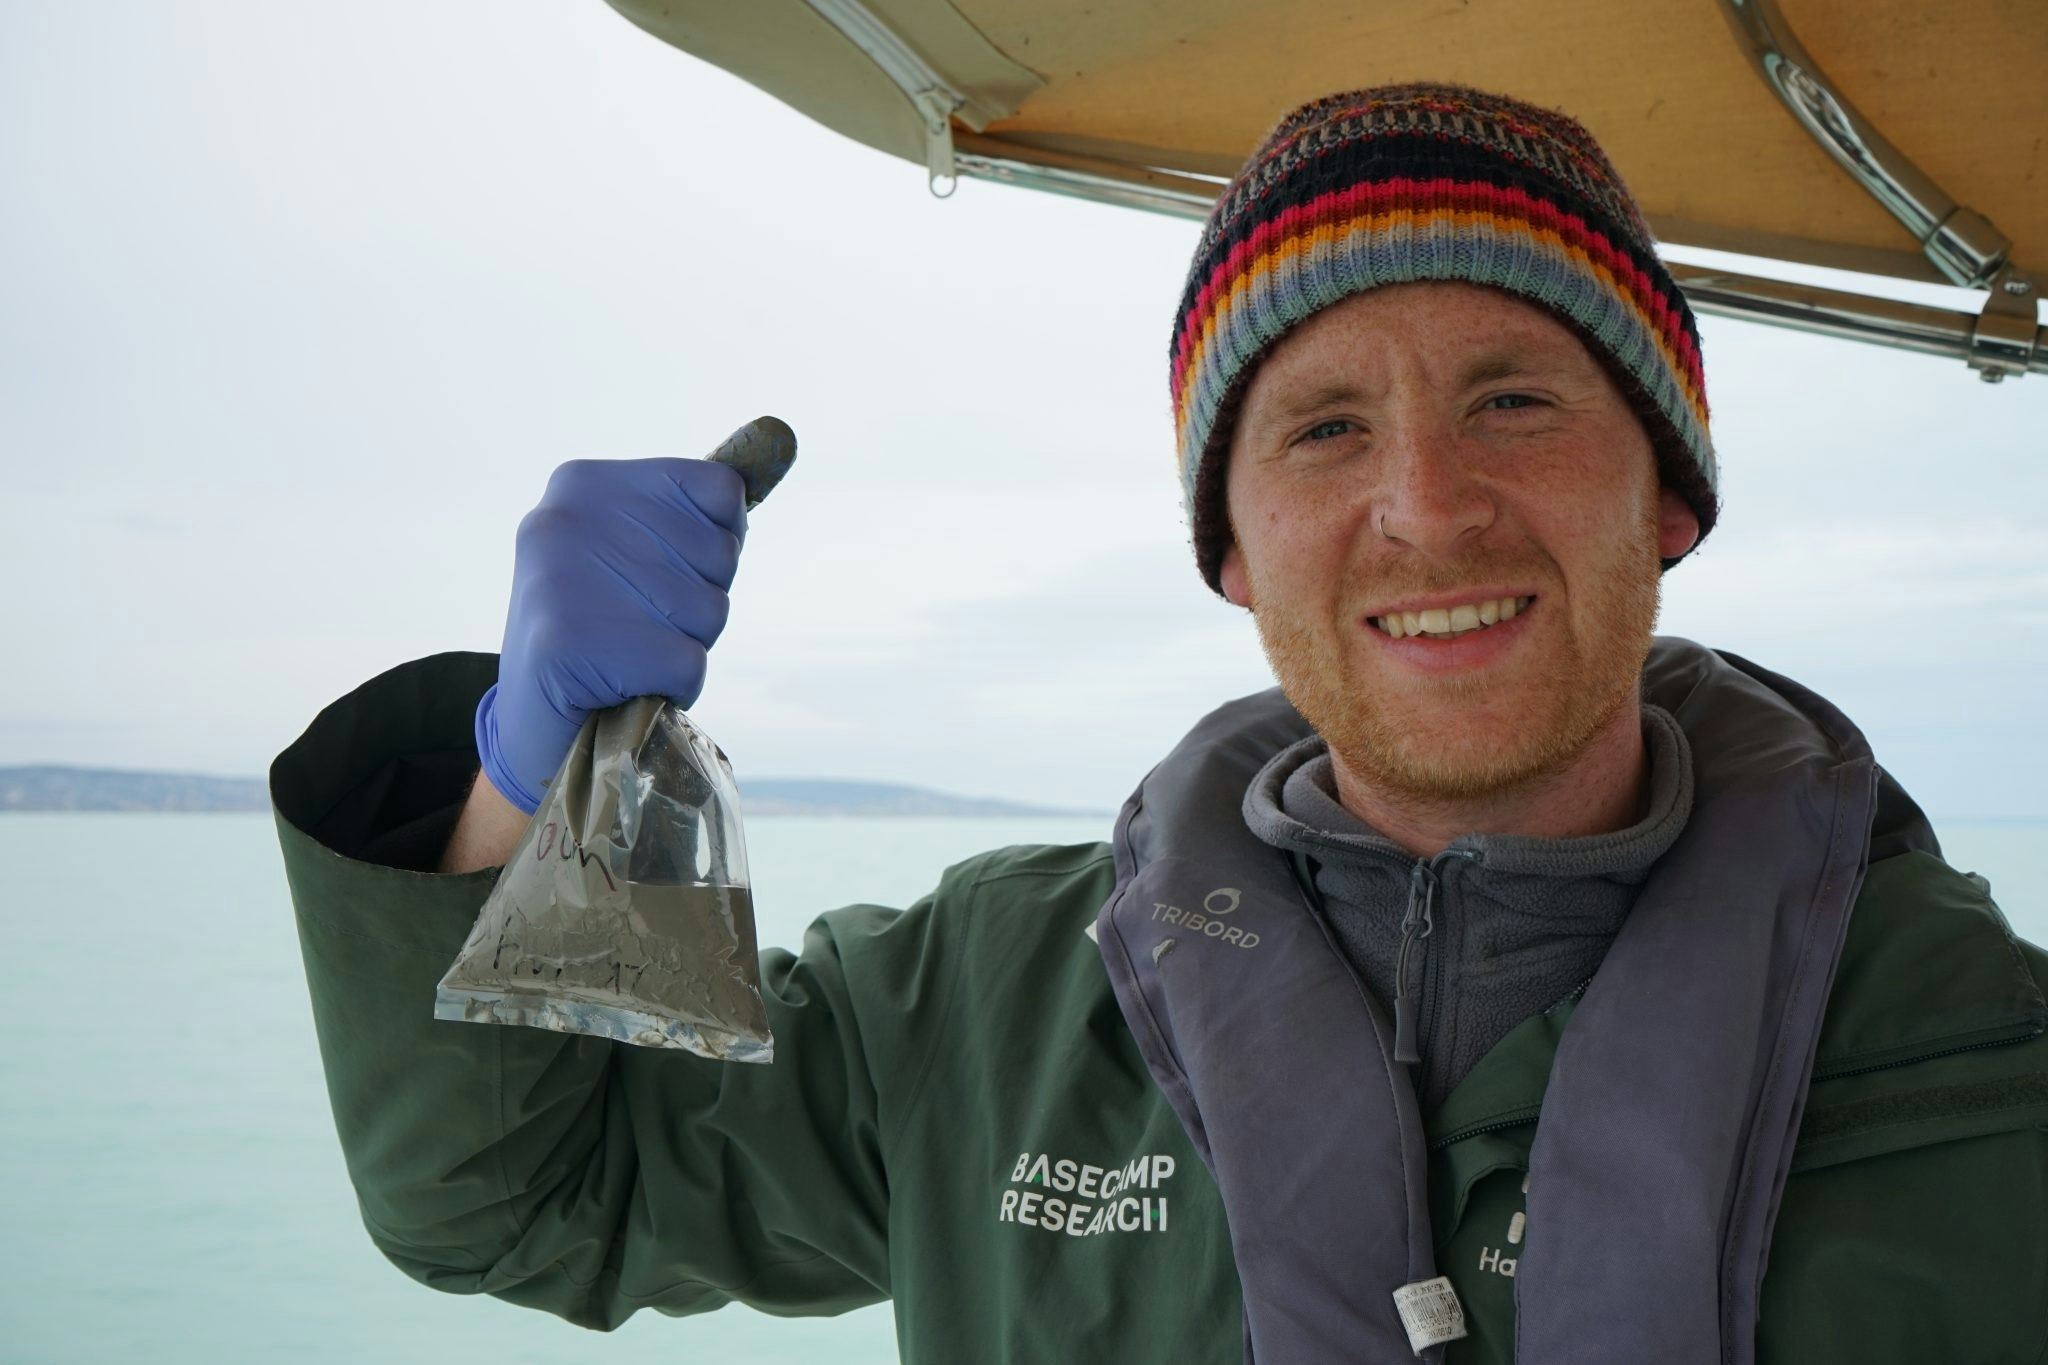 Basecamp's Marlon Clark holds up a sample bag containing sediment and water samples from Lake Balaton.